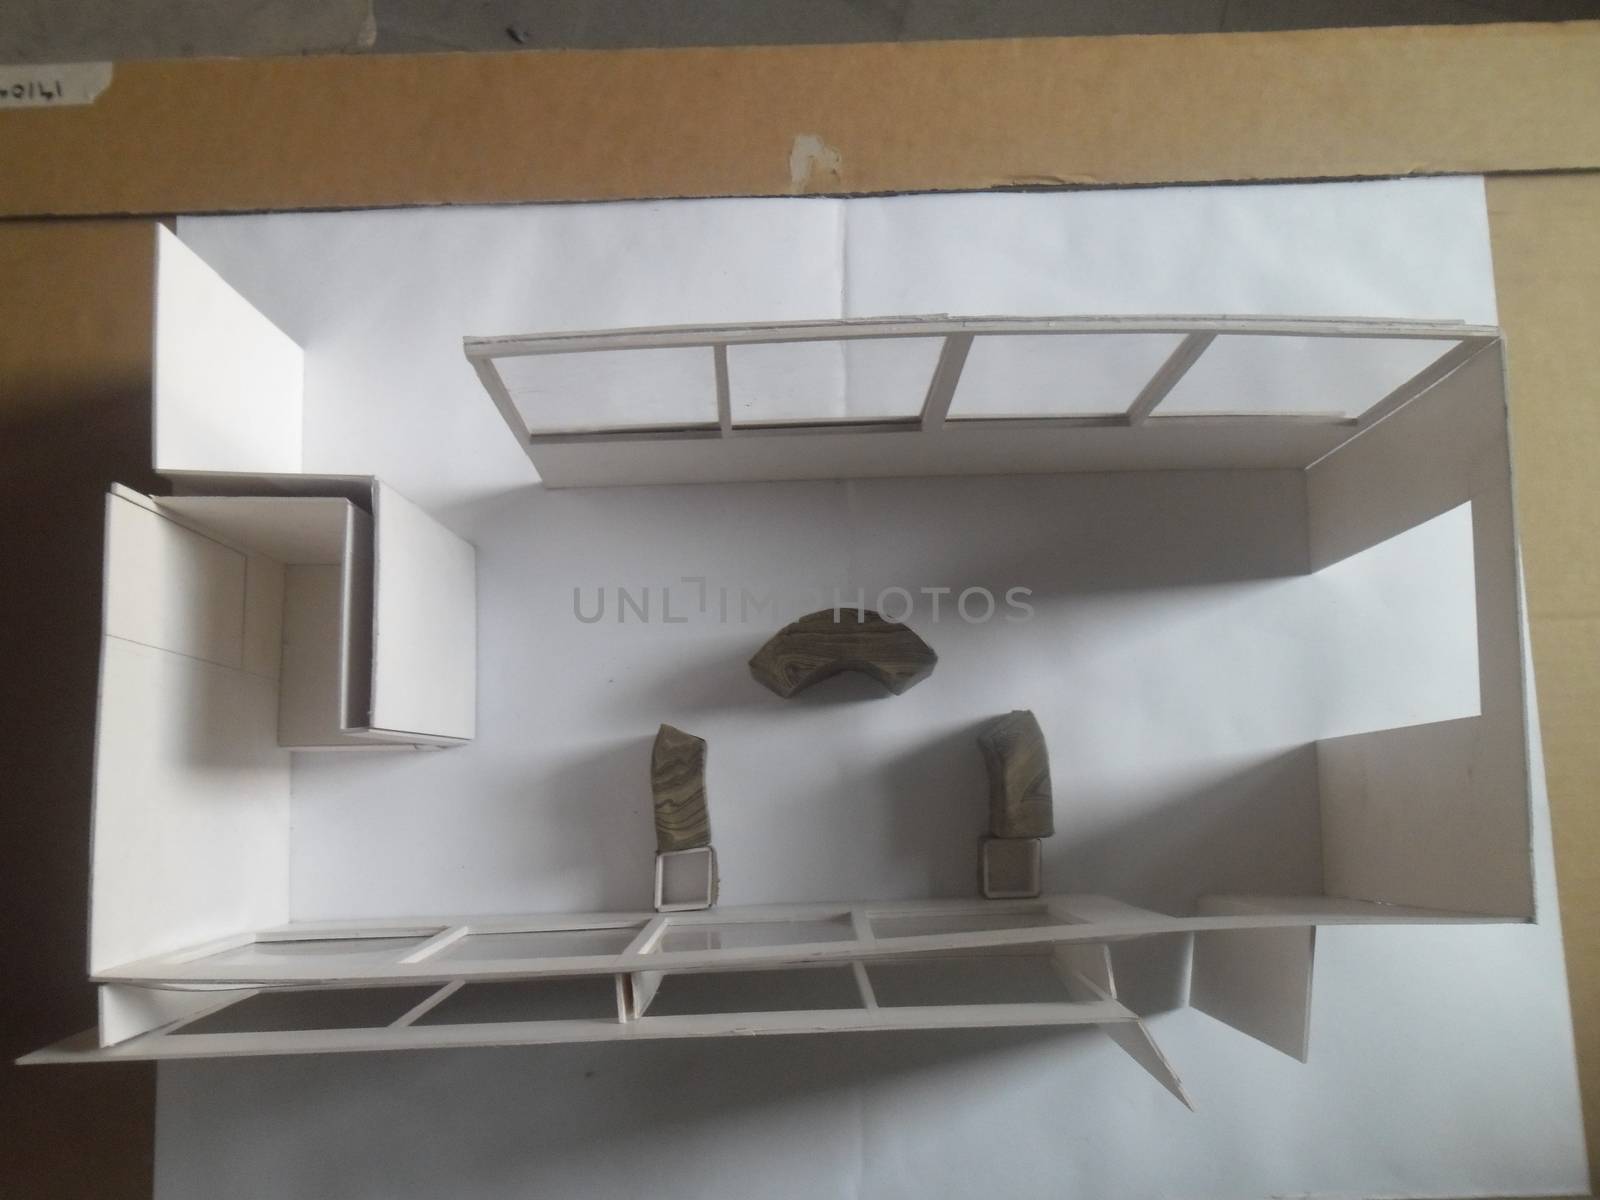 Architecture model with round seating space and large windows by shawlinmohd